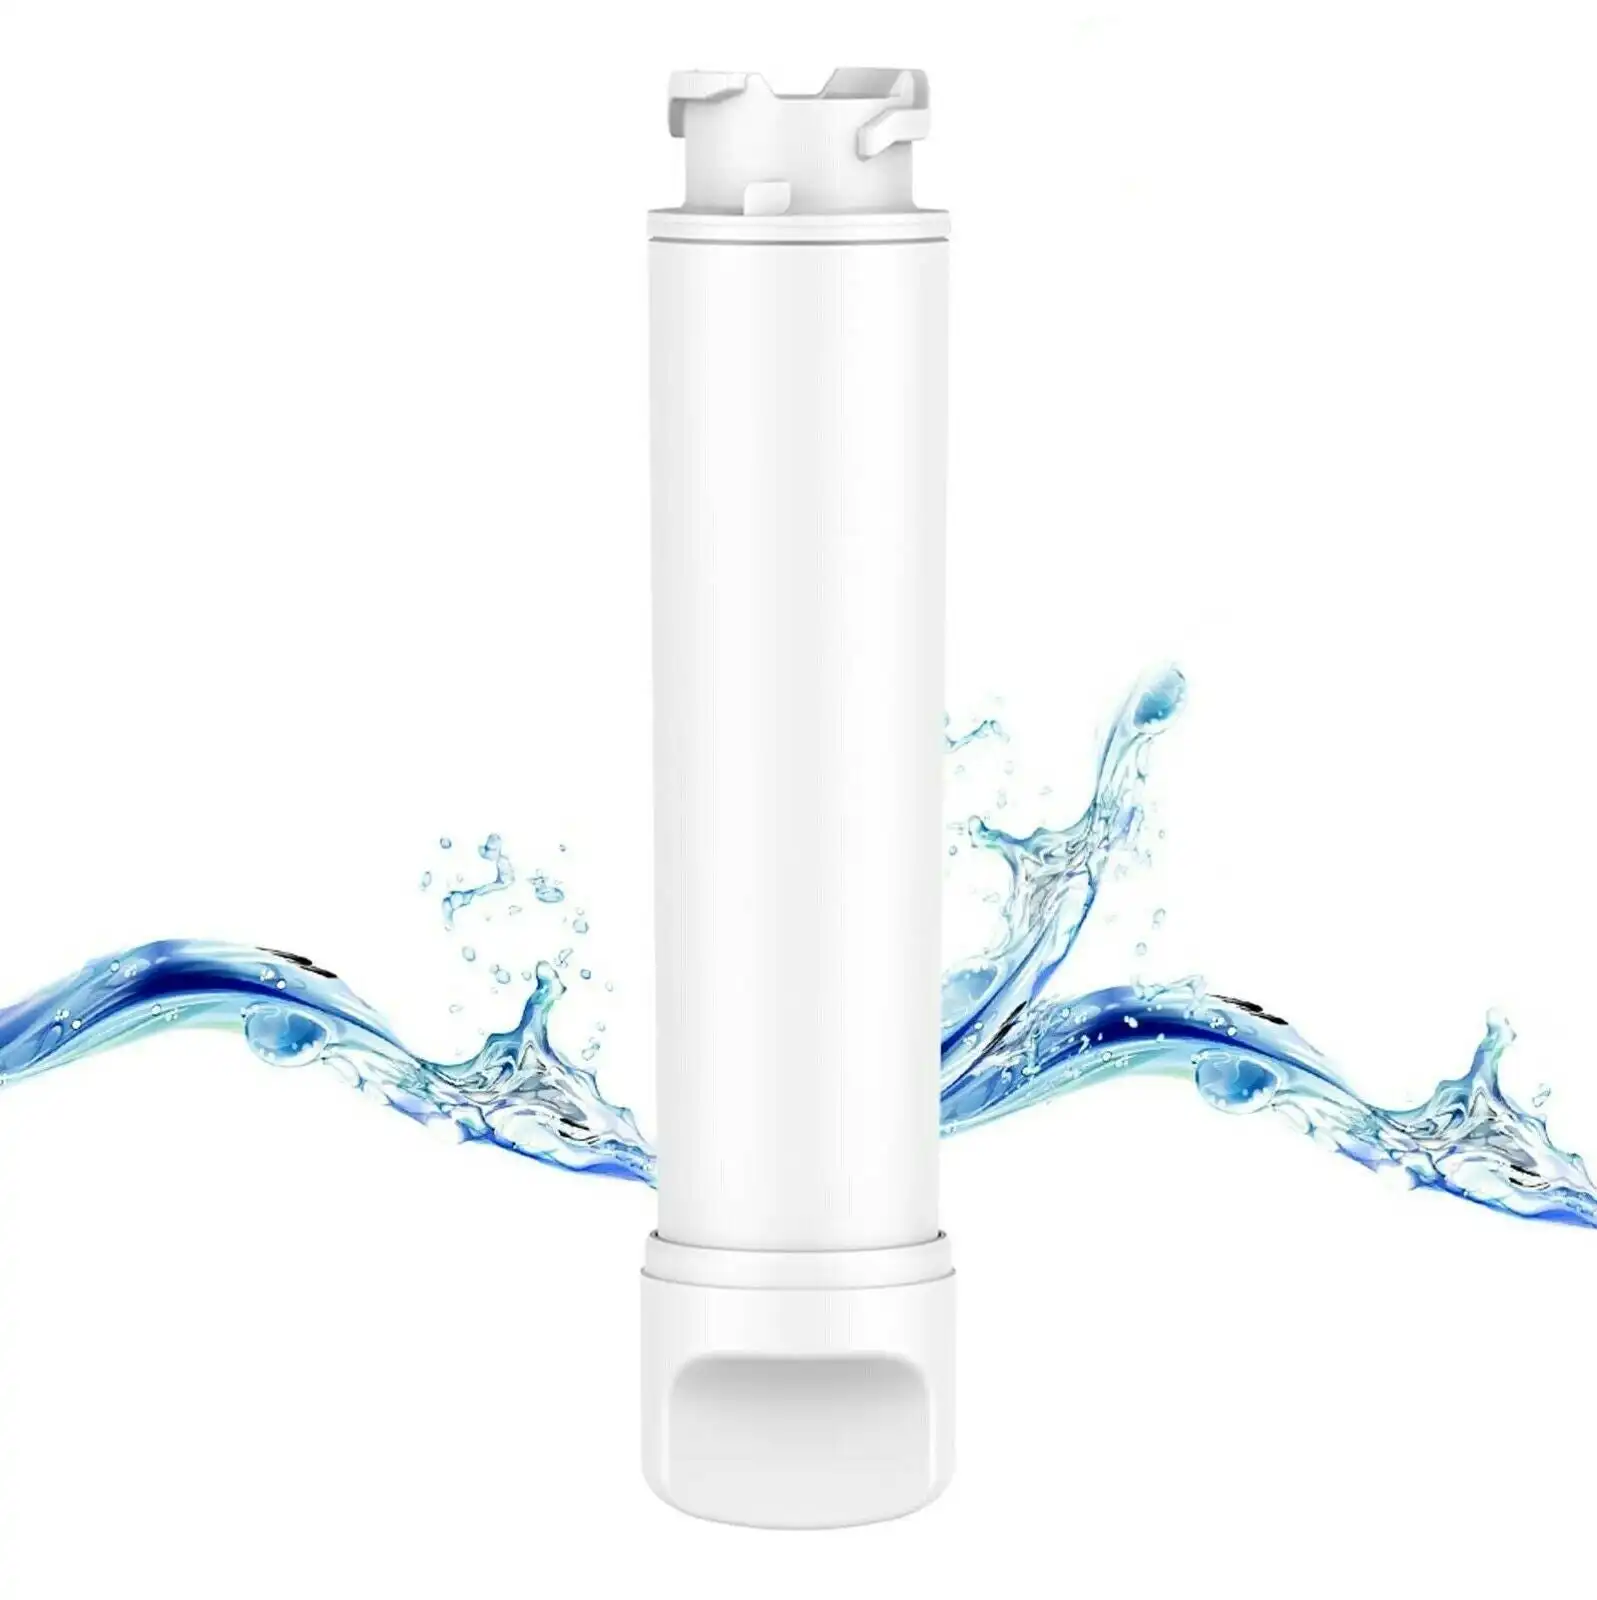 Westinghouse Compatible French Door Fridge Water Filter for WHE6060SA